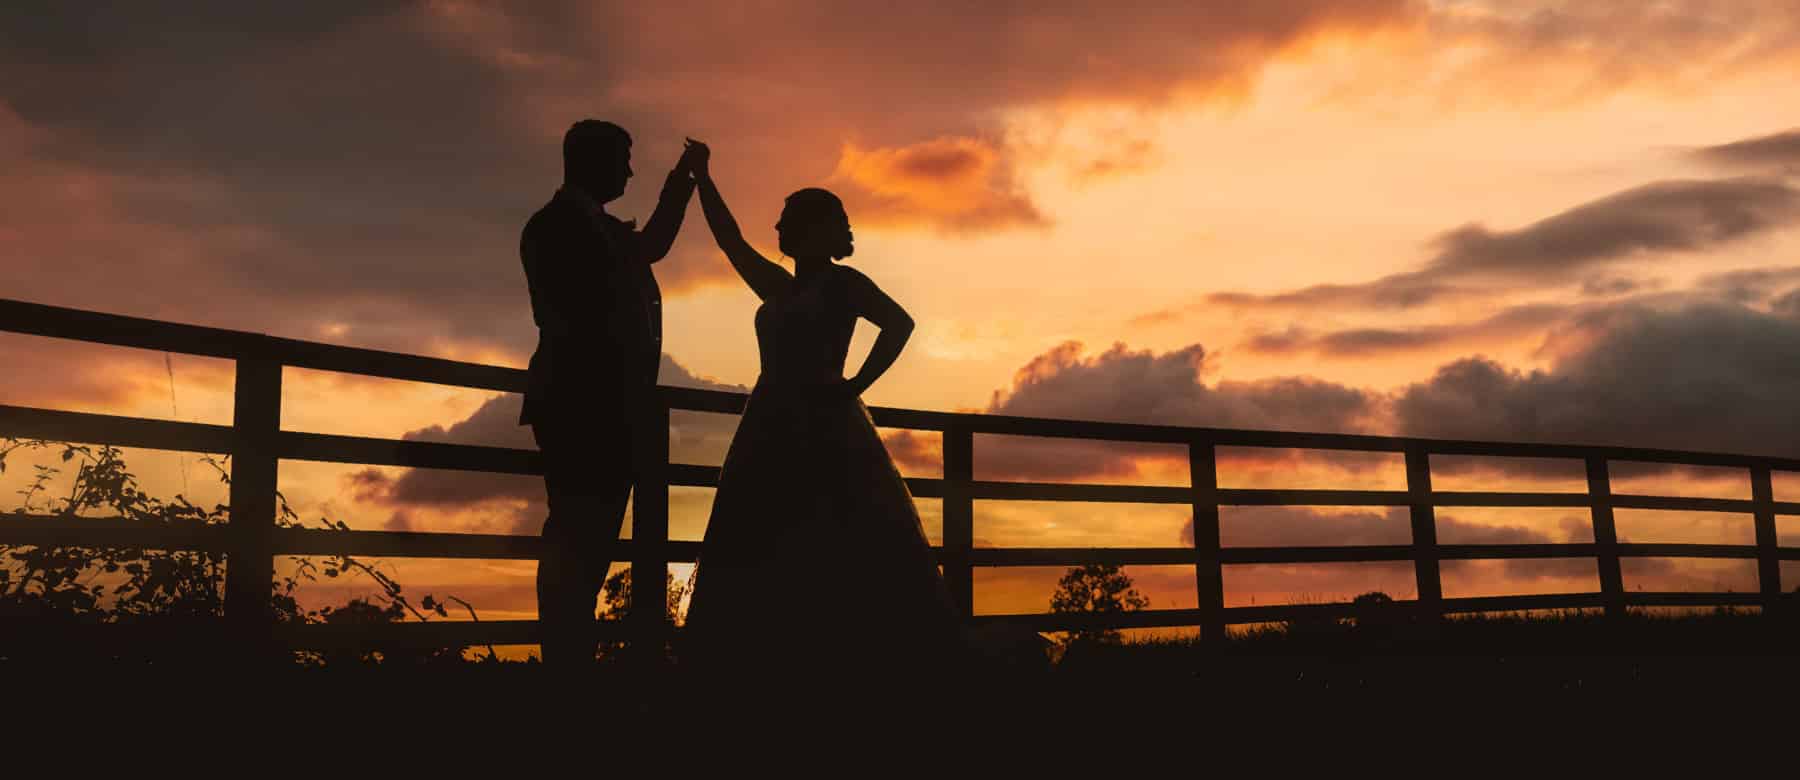 Sunset wedding photography at Winters Tale Country Wedding Barn